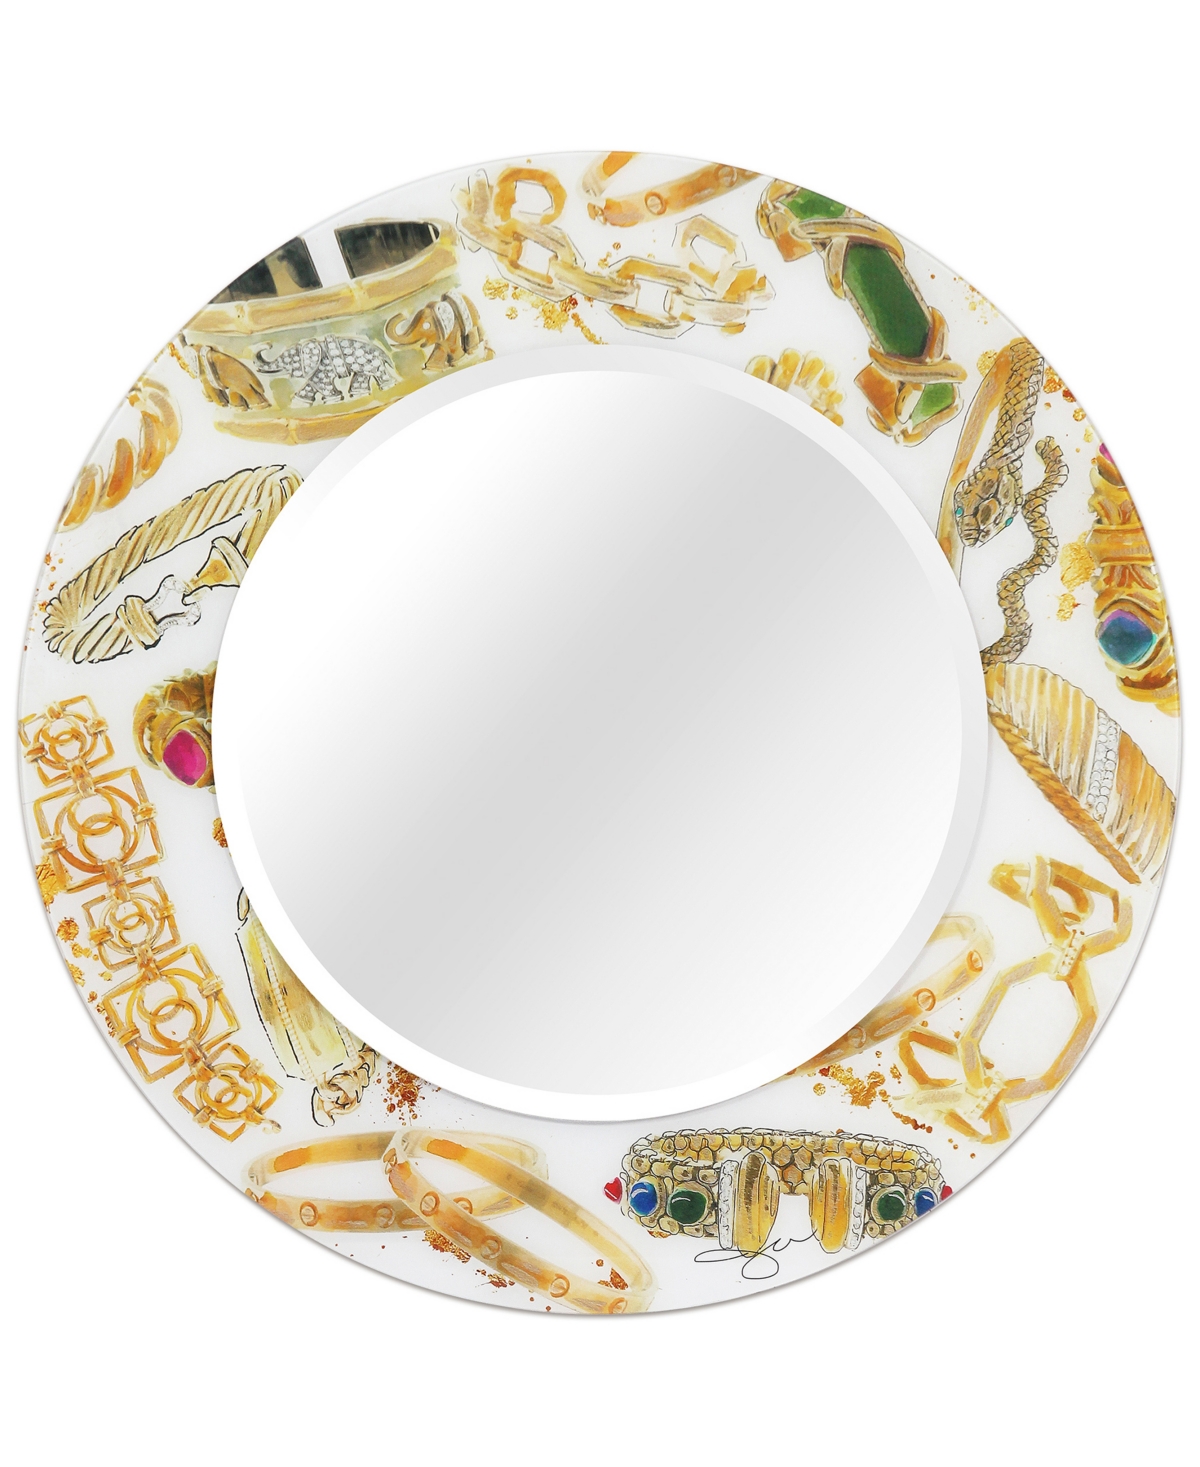 Gold Charm Round Beveled Wall Mirror on Free Floating Reverse Printed Tempered Art Glass, 36" x 36" x 0.4" - Gold